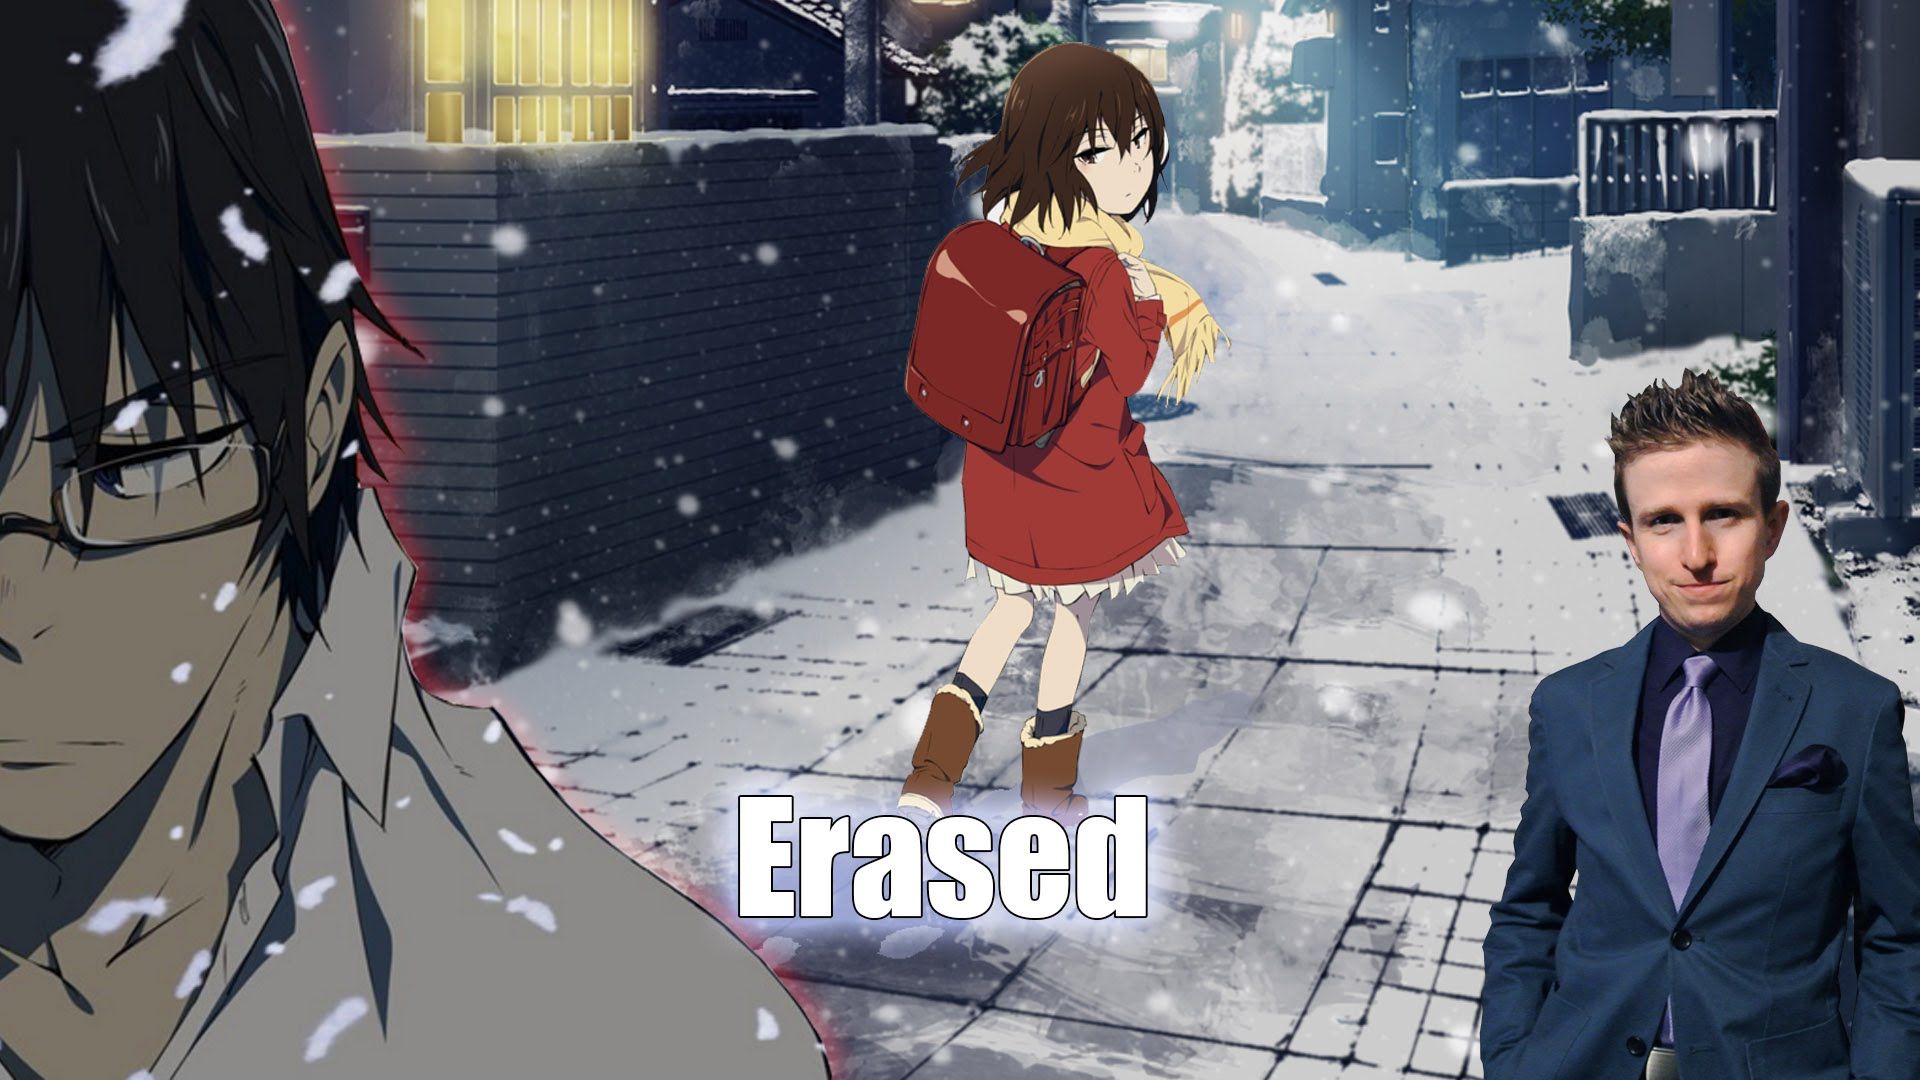 Erased Wallpapers Hd posted by Christopher Thompson.